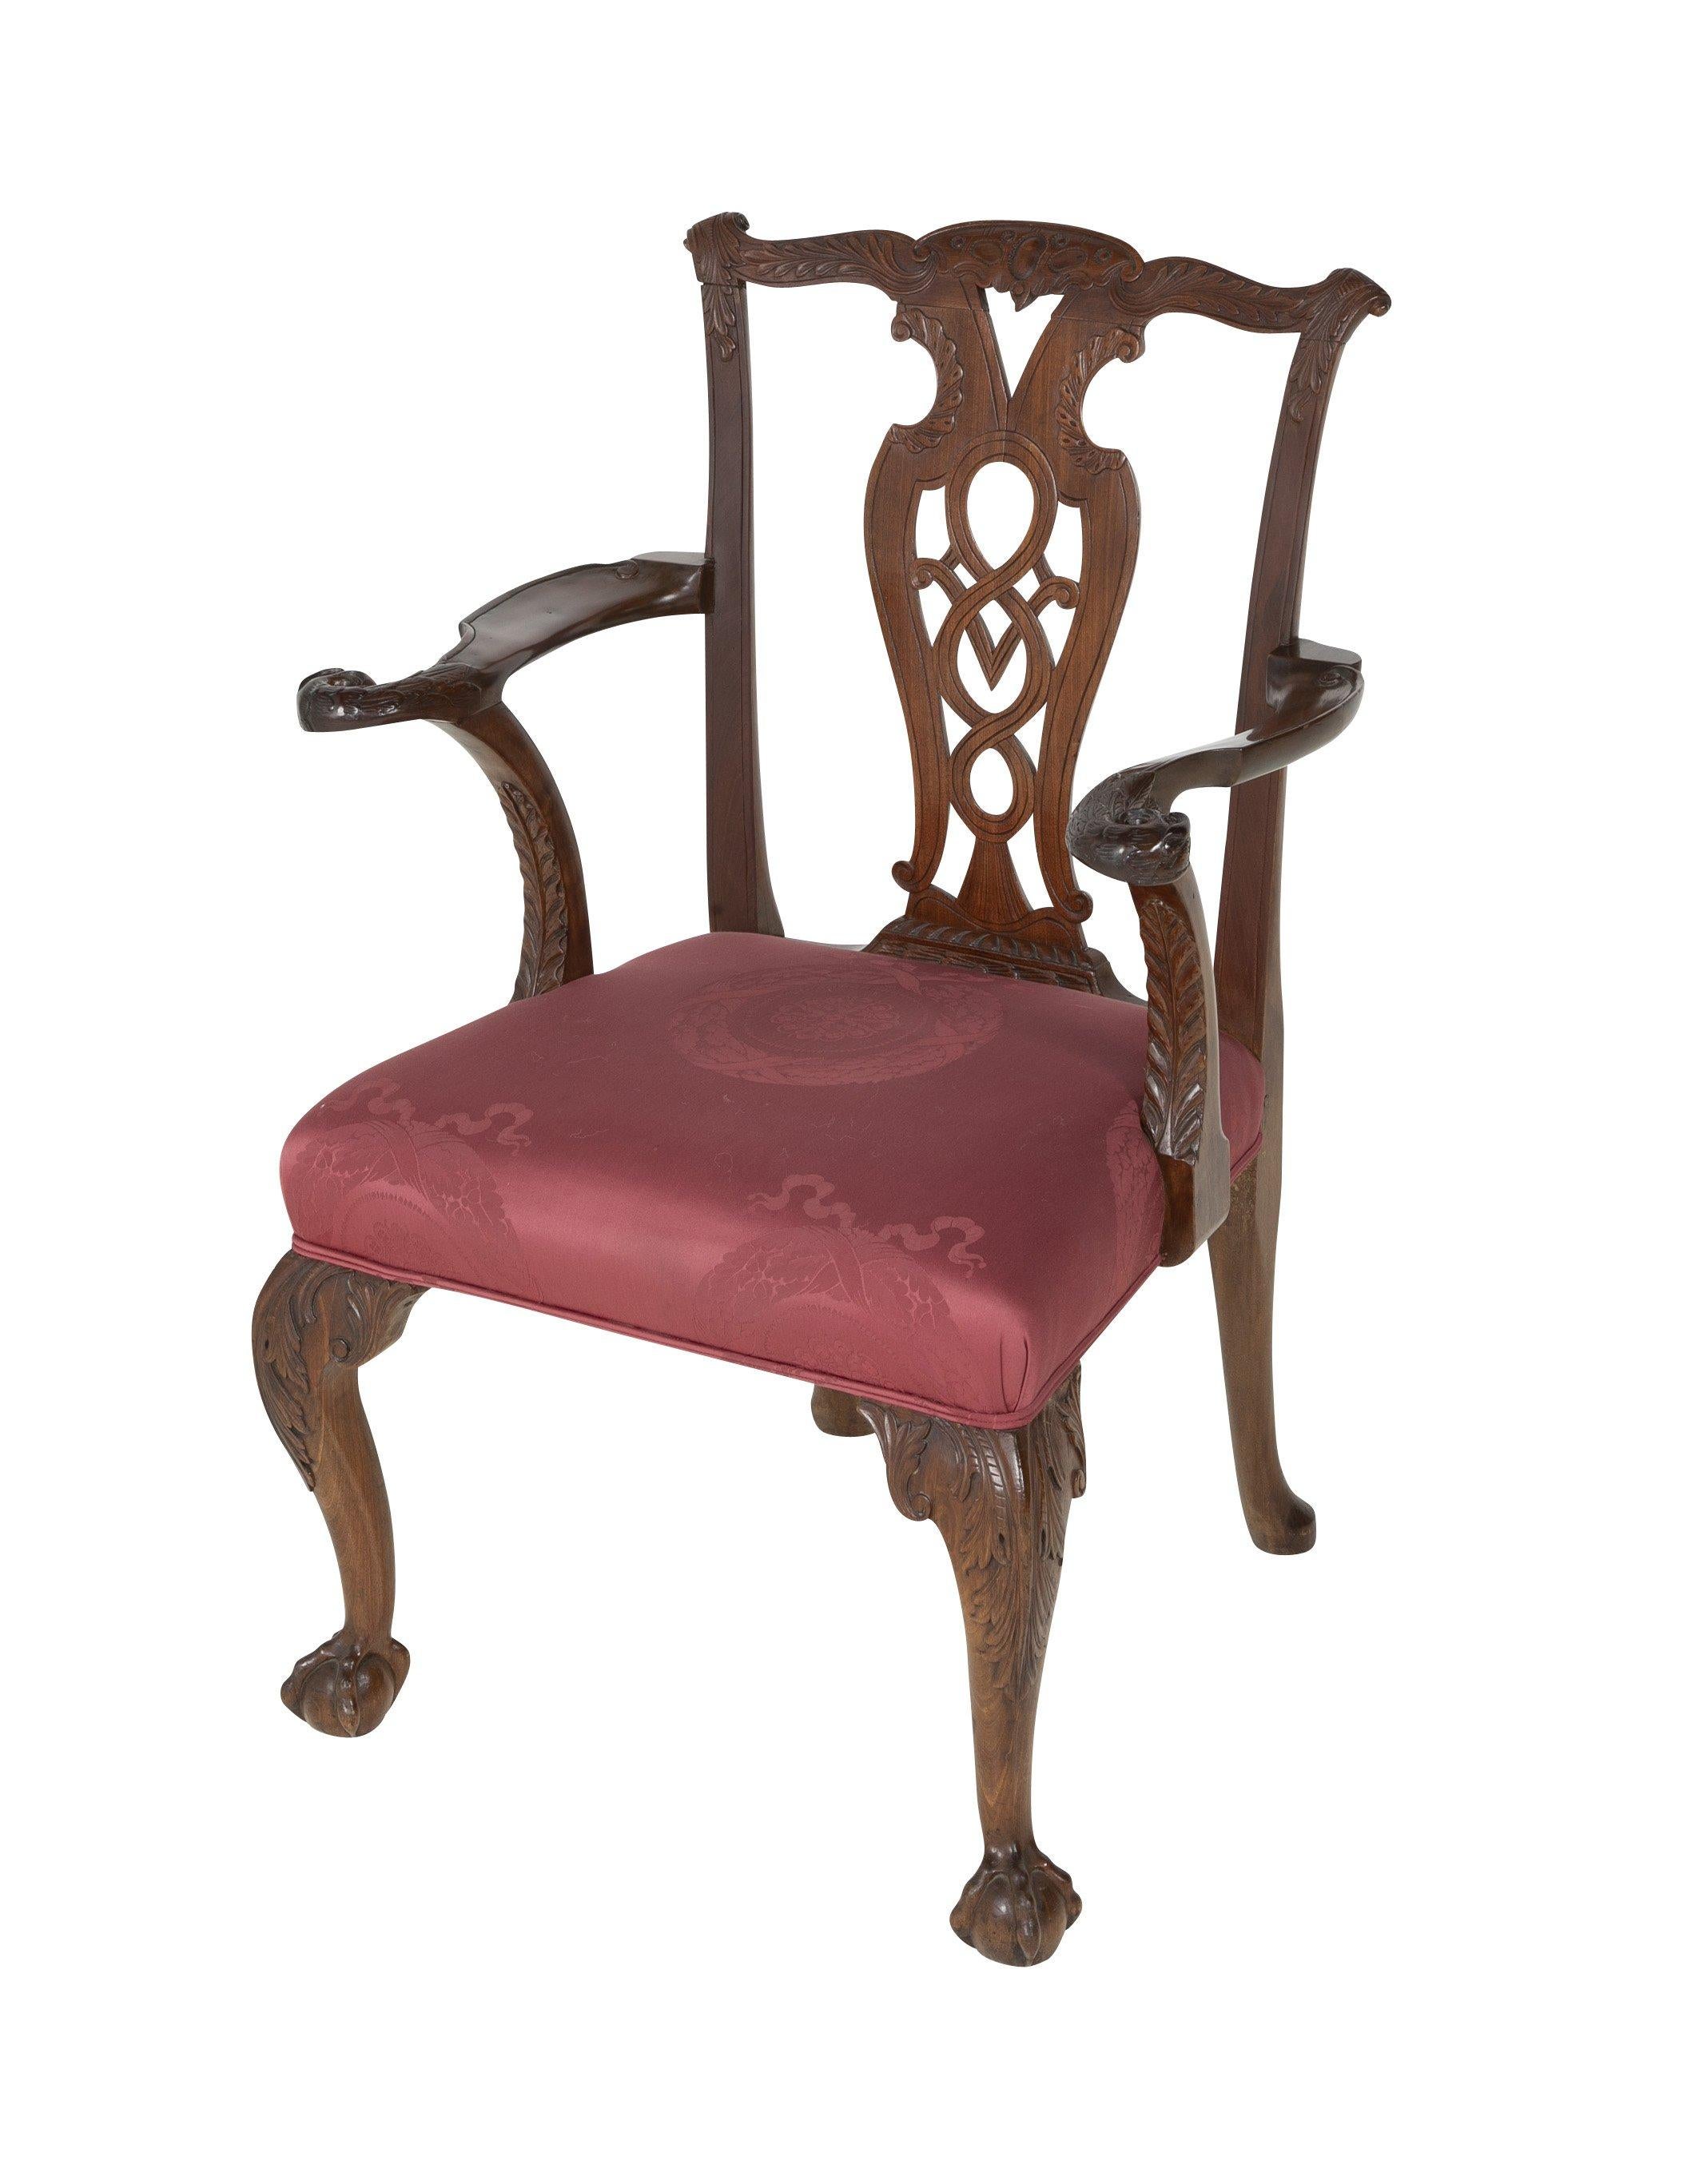 George II (Chippendale) period eagle arm ball and claw foot carved armchair of Padouk wood, circa 1760.

Measures: Seat height 18.5